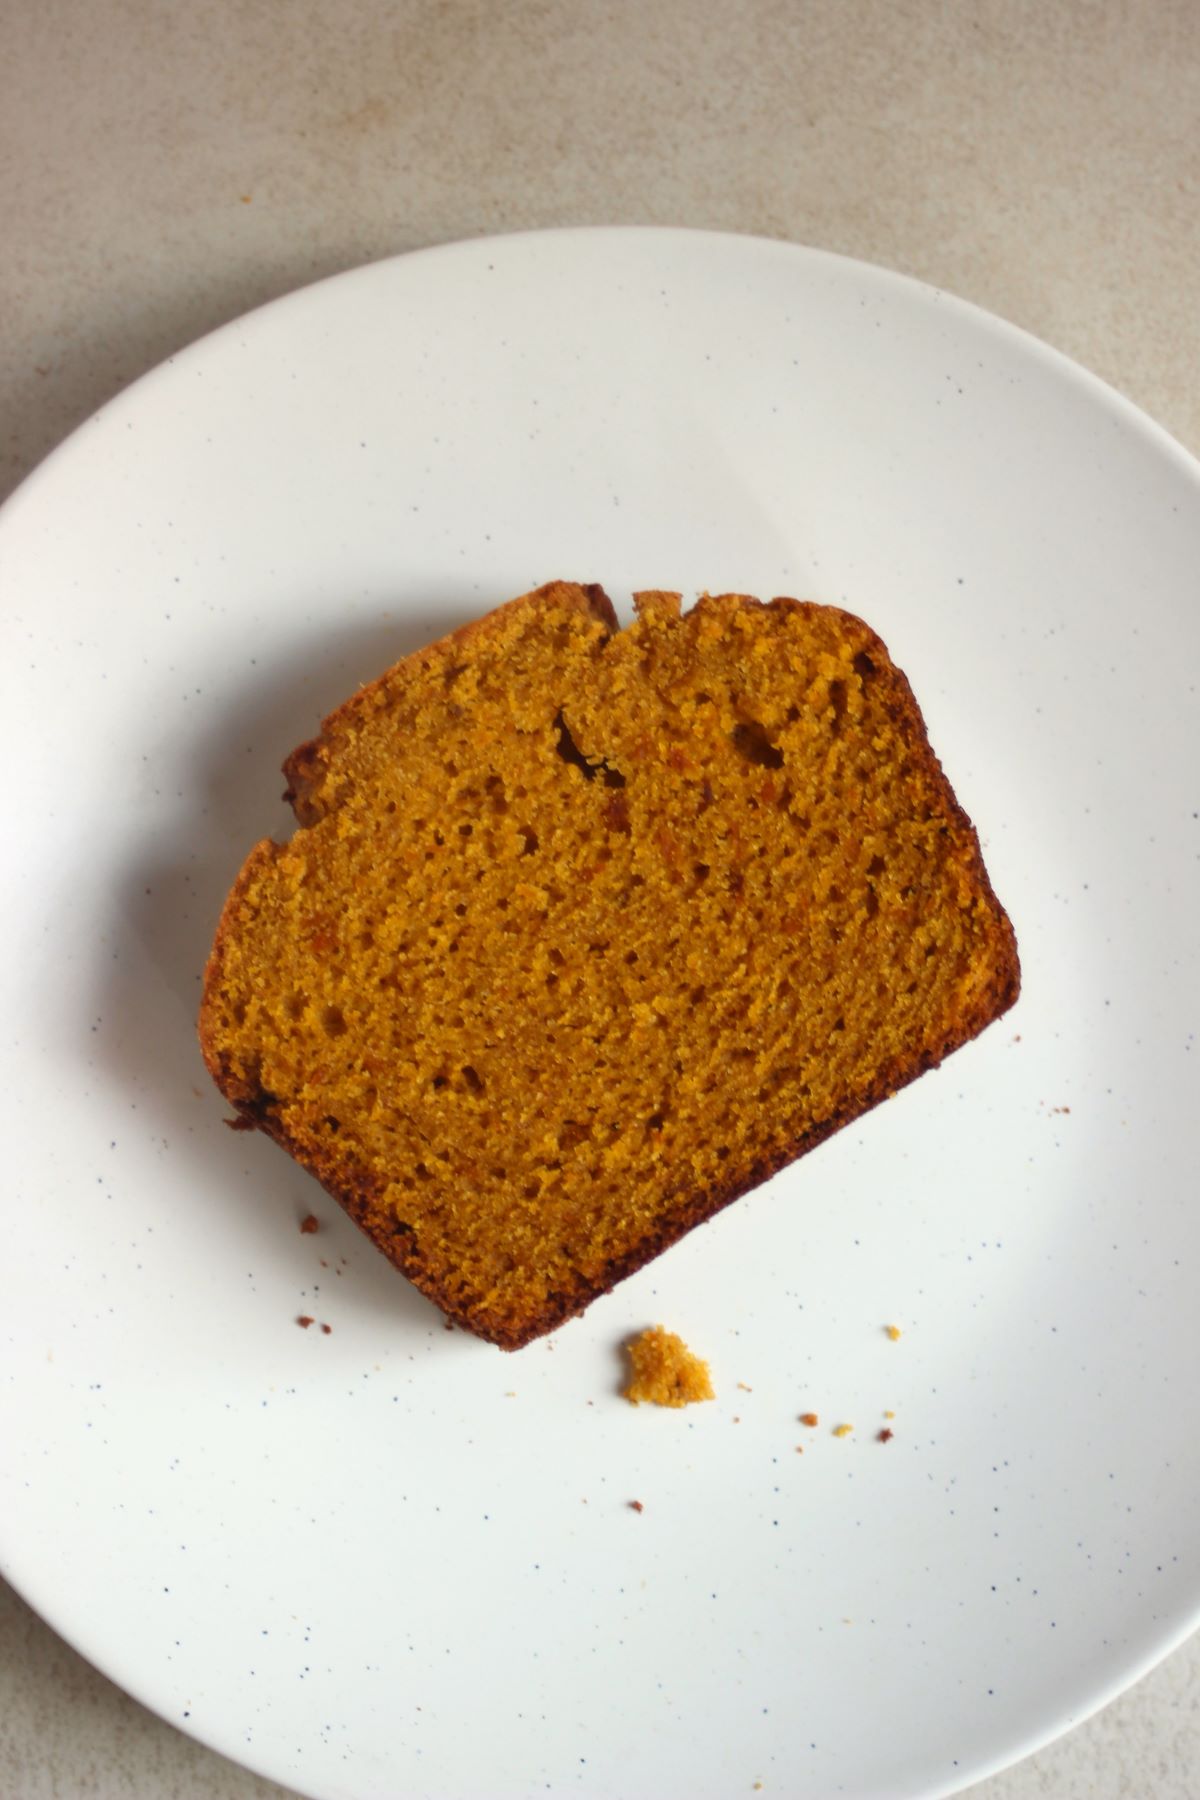 A slice of pumpkin bread on a white plate seen from above.